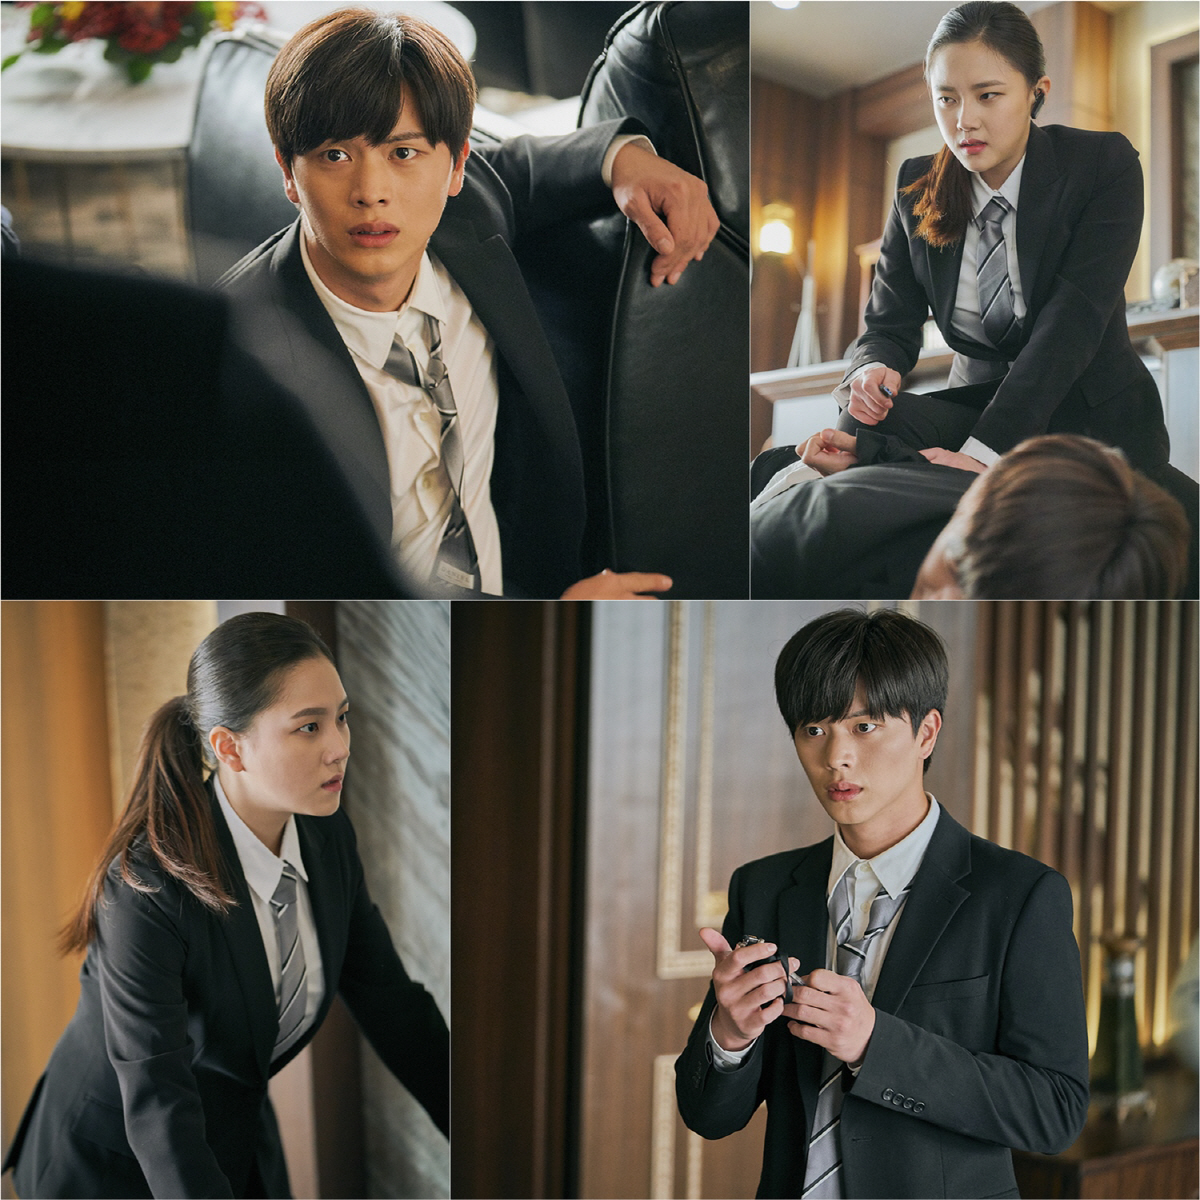 Today (27th), Pairs gloves sports car Yook Sungjae and Daeun Jeong finally have their first meeting with the awards.The JTBC drama Pairs gloves sports car (playplayed by Ha Yoon-ah, director Jeon Chang-geun, production Samhwa Networks, JTBC Studio, 12 episodes) has opened the spirit that connects the underworld and the world since birth, and Han Gang-bae (Yook Sungjae) has become a unique character that confesses the inner heart to each person who touches the body.For Wolju (Hwang Jeong-eum), who witnessed people who confessed their troubles with one touch, he was like a ray of light.Because it is a strong talent that is essential for Foa, which has to fill nine performance in a month, Kang Bae became a full-time employee when he was scouted by Foa.However, the steel woman, Daeun Jeong, whose unique constitution does not work, appears in front of Kang Bae today (27th).Kang Bae has been lonely because of the unique constitution and has been living with Legend bullying.However, as it was revealed that one ordinary human being could go in and out of the dream world The Master that could not even be imagined, he eventually became a member of Dream Bengers with Wolju and Gui (Choi Won-young).Kang Bae, who decided to fix the specific constitution by feeling the sense of belonging that he did not know before, is expected to continue his life in earnest by going to and from Mart and Foa.Looking at the preliminary preview video, I will perform various activities such as Foa aunt is good at counseling, turning coupons, and empathizing.But there is a variable in front of this riverboat, a person who bounces off the unique constitution that has never worked.The main character is Kang Yeo-rin (Daeun Jeong), who has infinite physical strength and steel mentality that are the exact opposite of her cute appearance.While he was working as a bodyguard for Choi (Yoo Sung-joo) of Sangil Hotel with his excellent martial arts skills, he will face the Foa trio who scrambled for the help of the student who was involved in the hiring scandal.In the still cut that was released ahead of the broadcast, the atmosphere of the unimaginable Kangbae and Jerin was detected from the first meeting.I feel a subtle tension in between, a look of embarrassment, an atmosphere that seems to happen at the moment.I feel nothing, said Jerin, who treated the gangbang as a strange person to be overwhelmed and resigned in the highlight video that was released before the first broadcast.It was Kang Bae who was embarrassed to say, It was a question that caused infinite curiosity about what story would be about the young man who did not have the unique constitution of Kang Bae.The production team said, In the three episodes of Recruitment Corruption broadcast today (27th), Kangbae and Jerin, such as the N- and S-drama of magnets, meet for the first time.Please expect what will happen to the first meeting of a steel tofu-like riverboat where people are disarmed and a steel tortoise that makes people run away.Pairs gloves sports car 3rd, today (27th) Wednesday night at 9:30 JTBC broadcast.